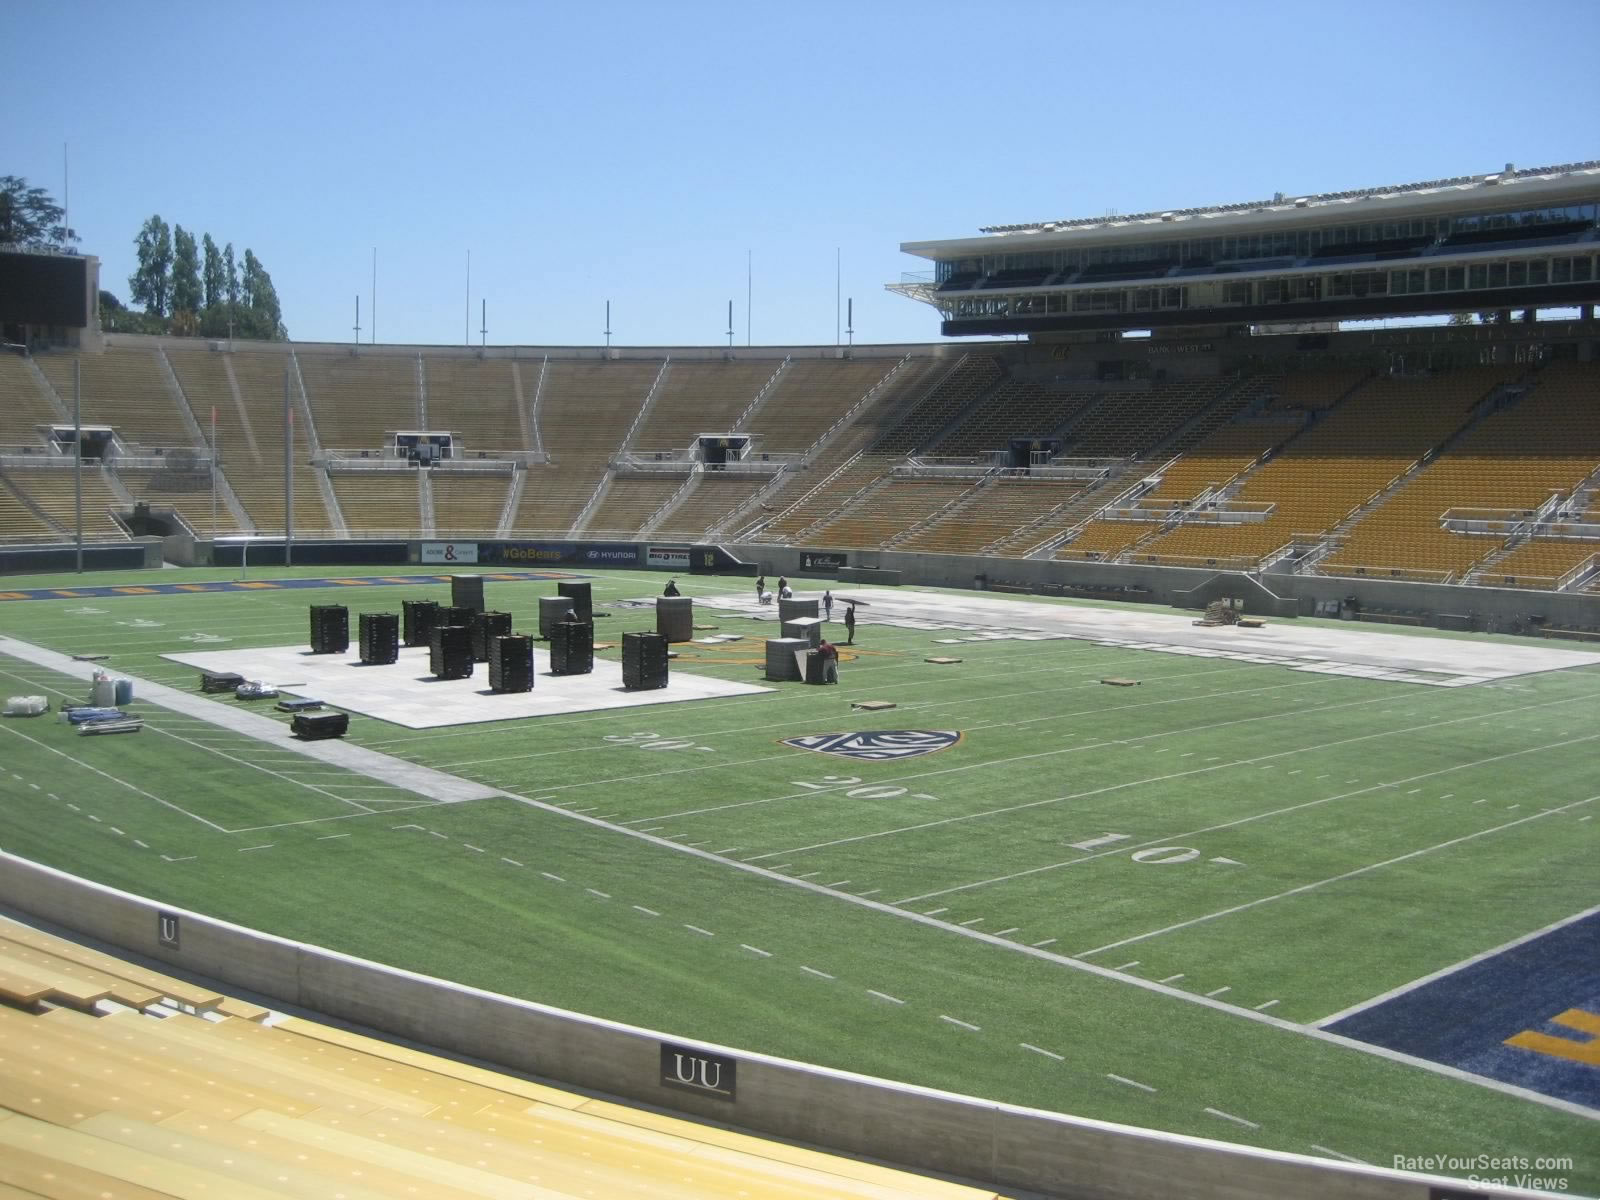 section v, row 22 seat view  - memorial stadium (cal)